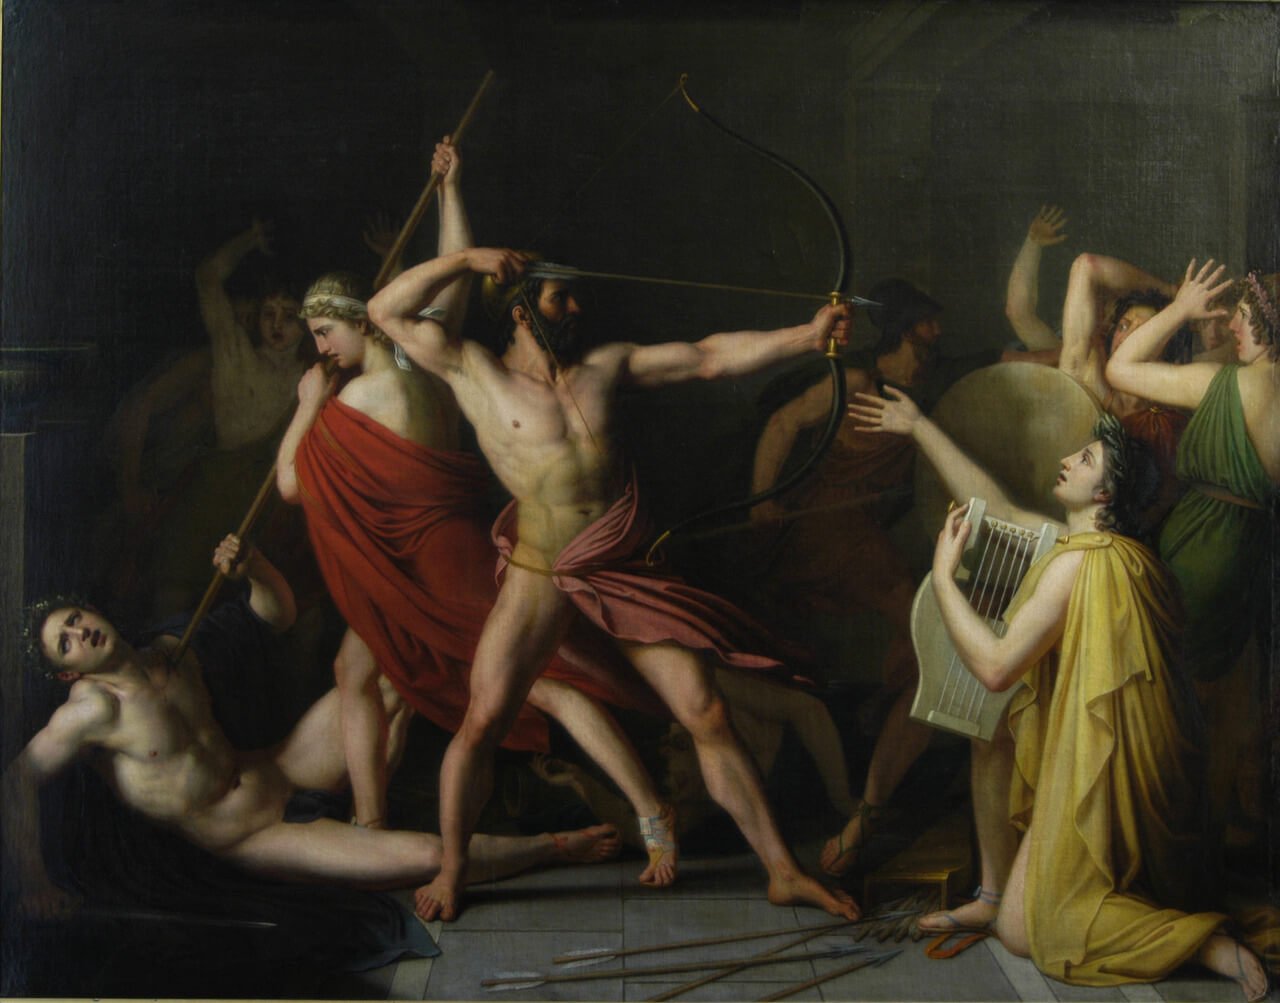 This painting represents Odysseus and Telemachus killing the suitors.